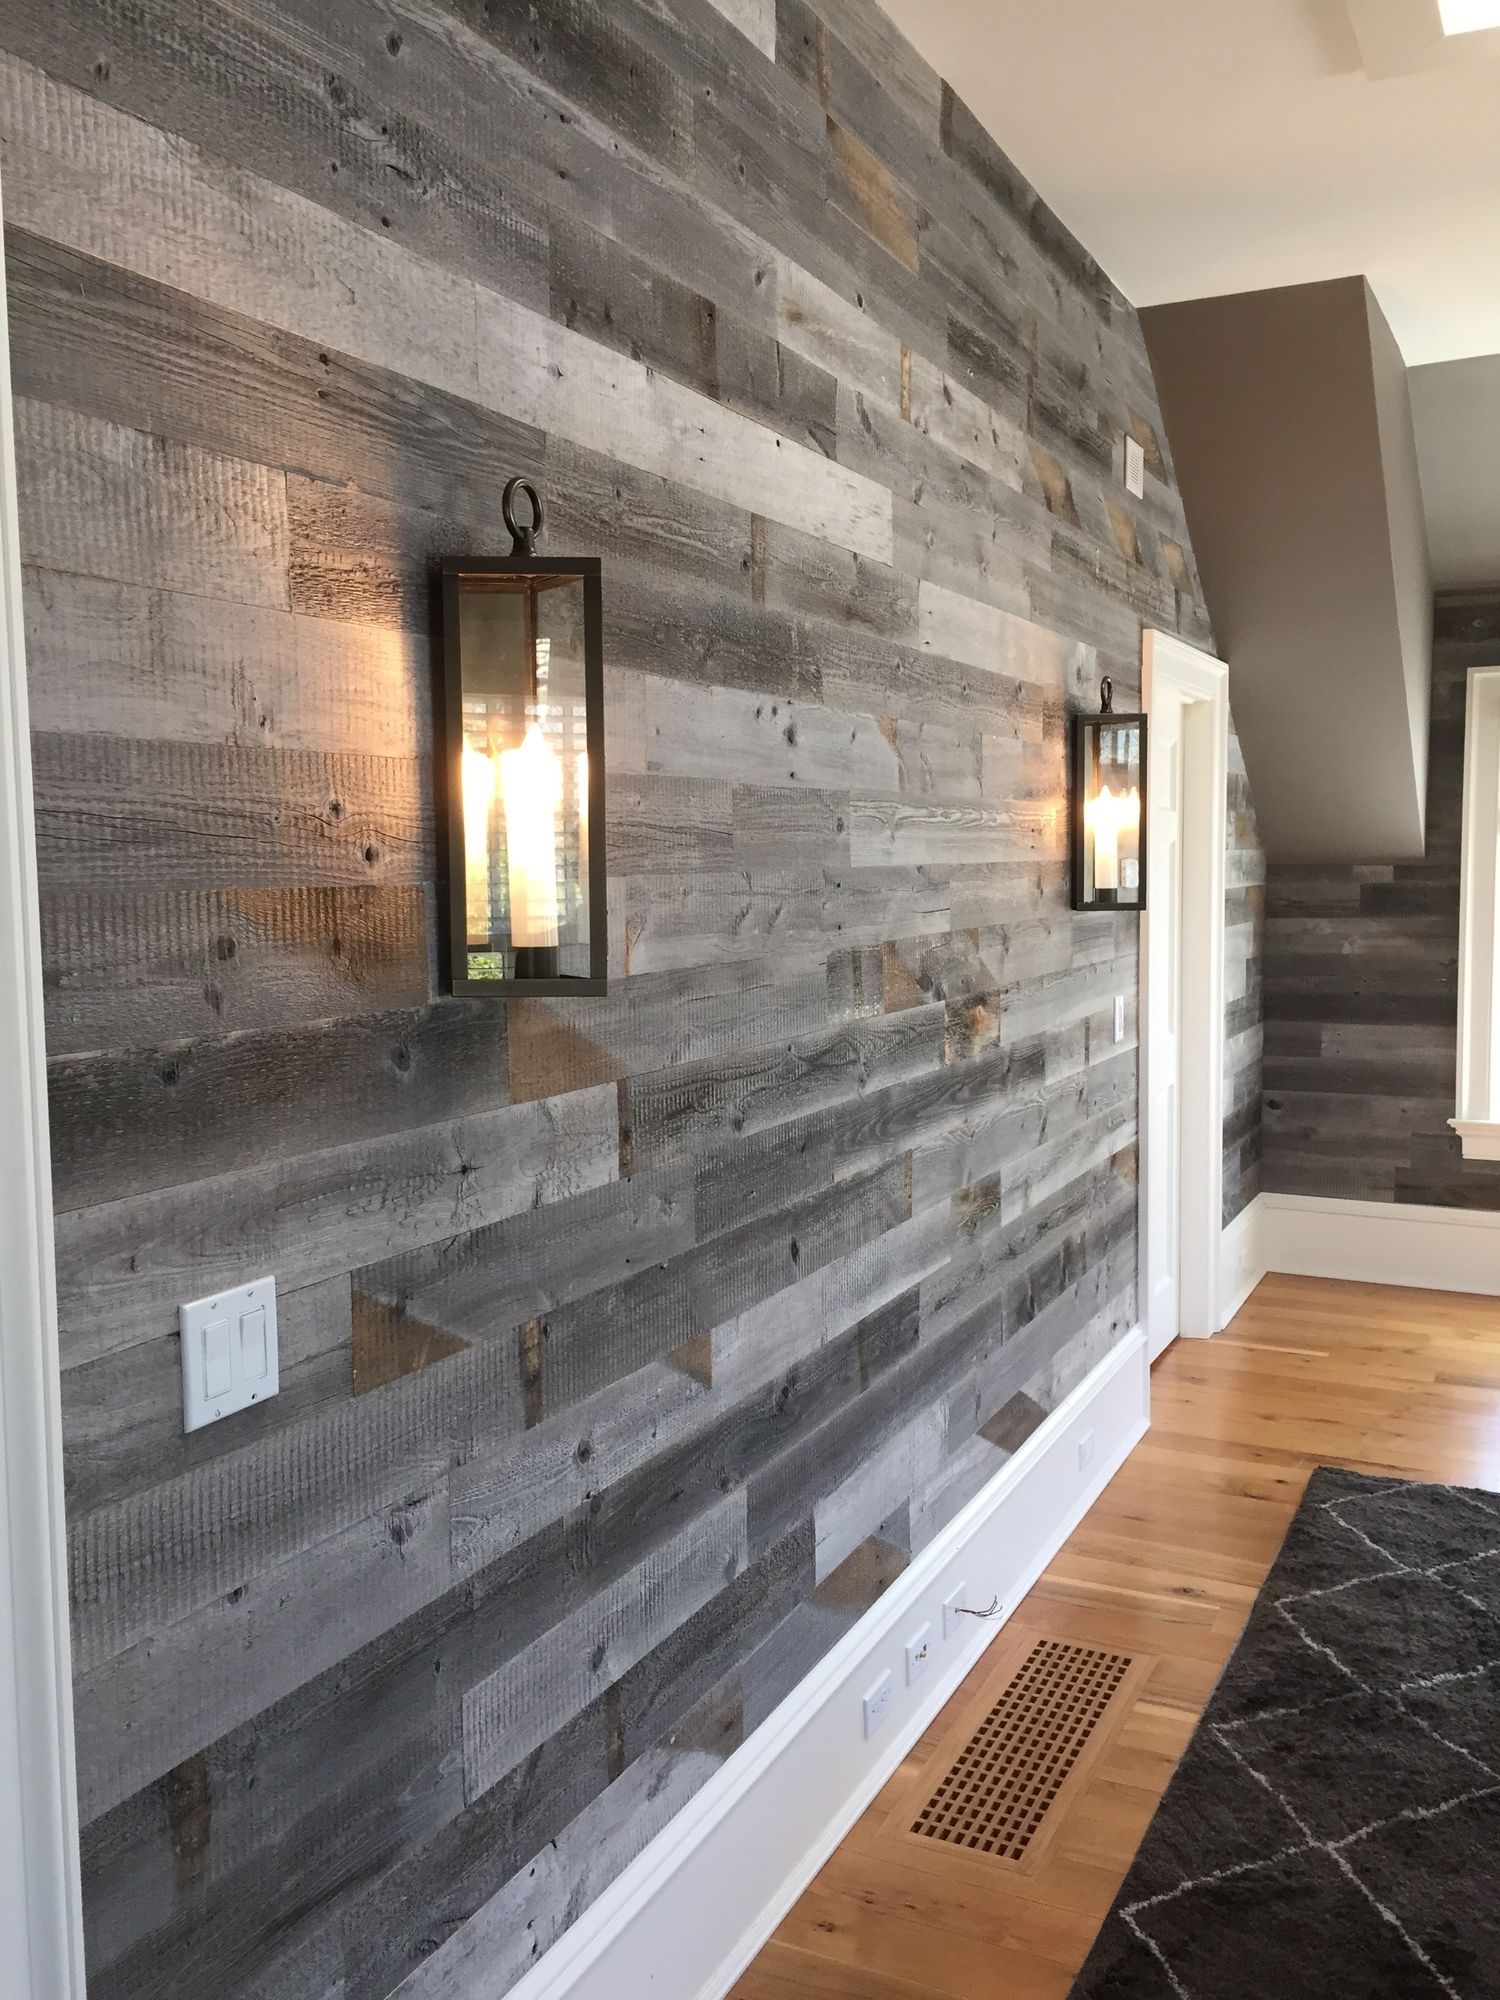 Stikwood Peel and Stick Wood Wall! Compliments of: Just Walls